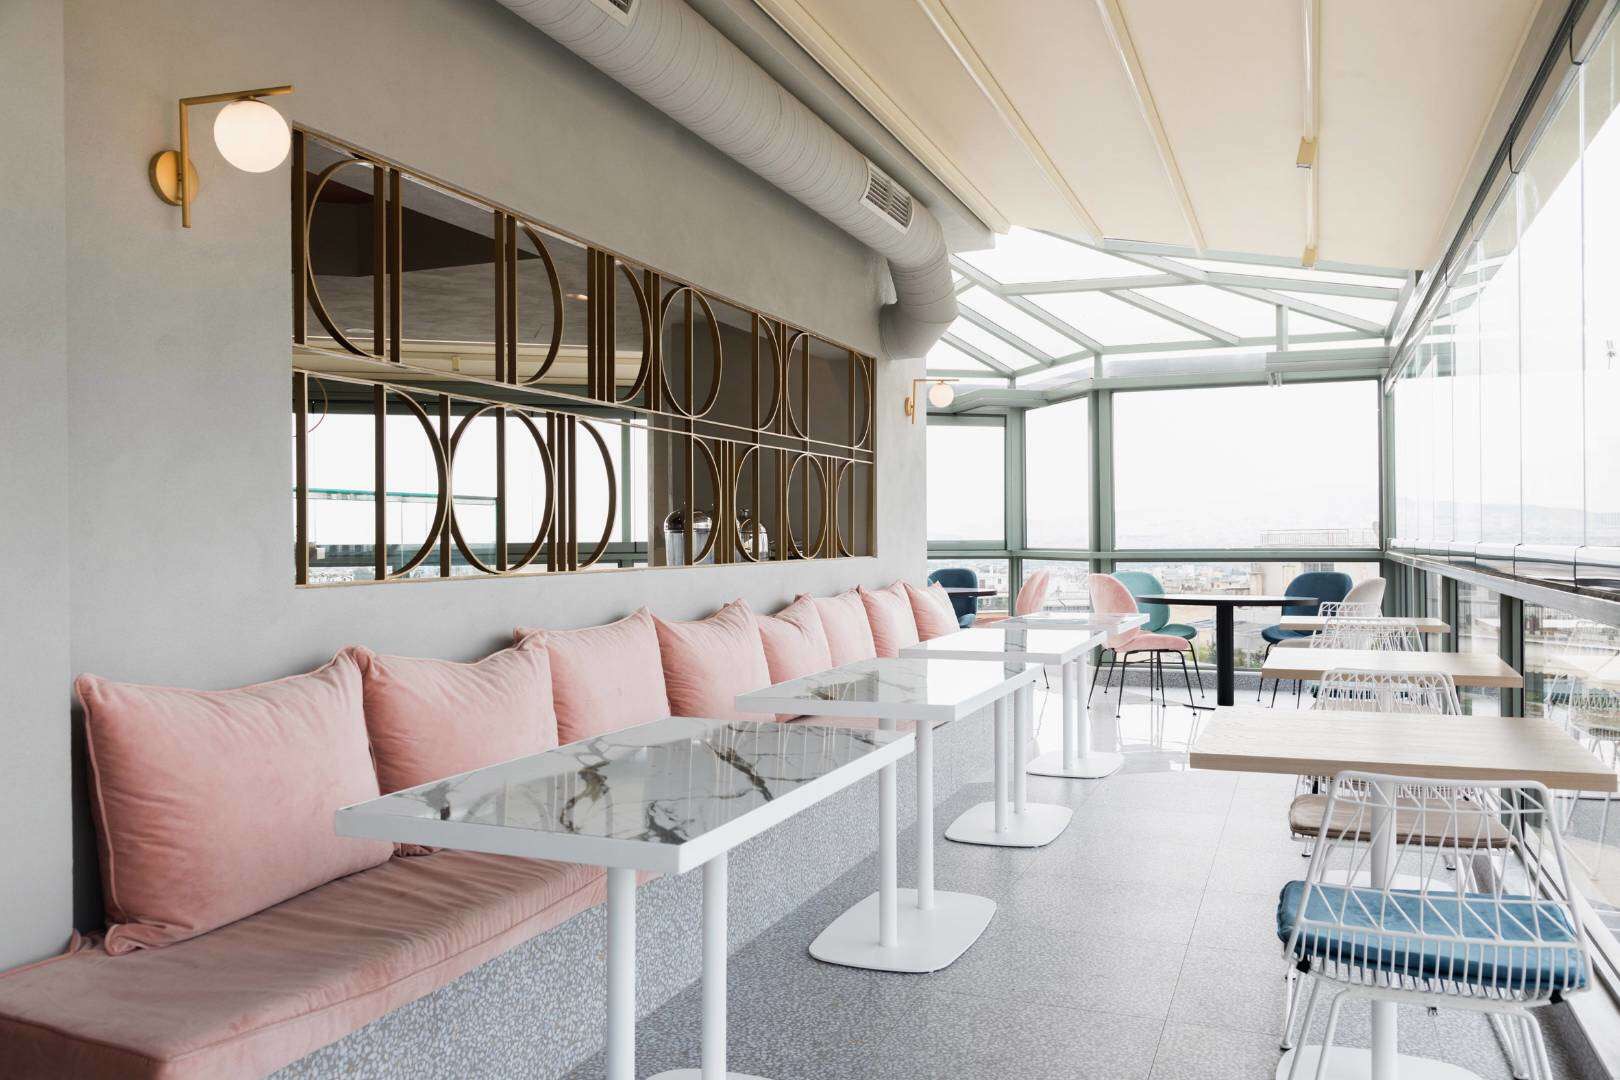 Fluo creates rooftop bar and breakfast room at Evripidis hot(图4)